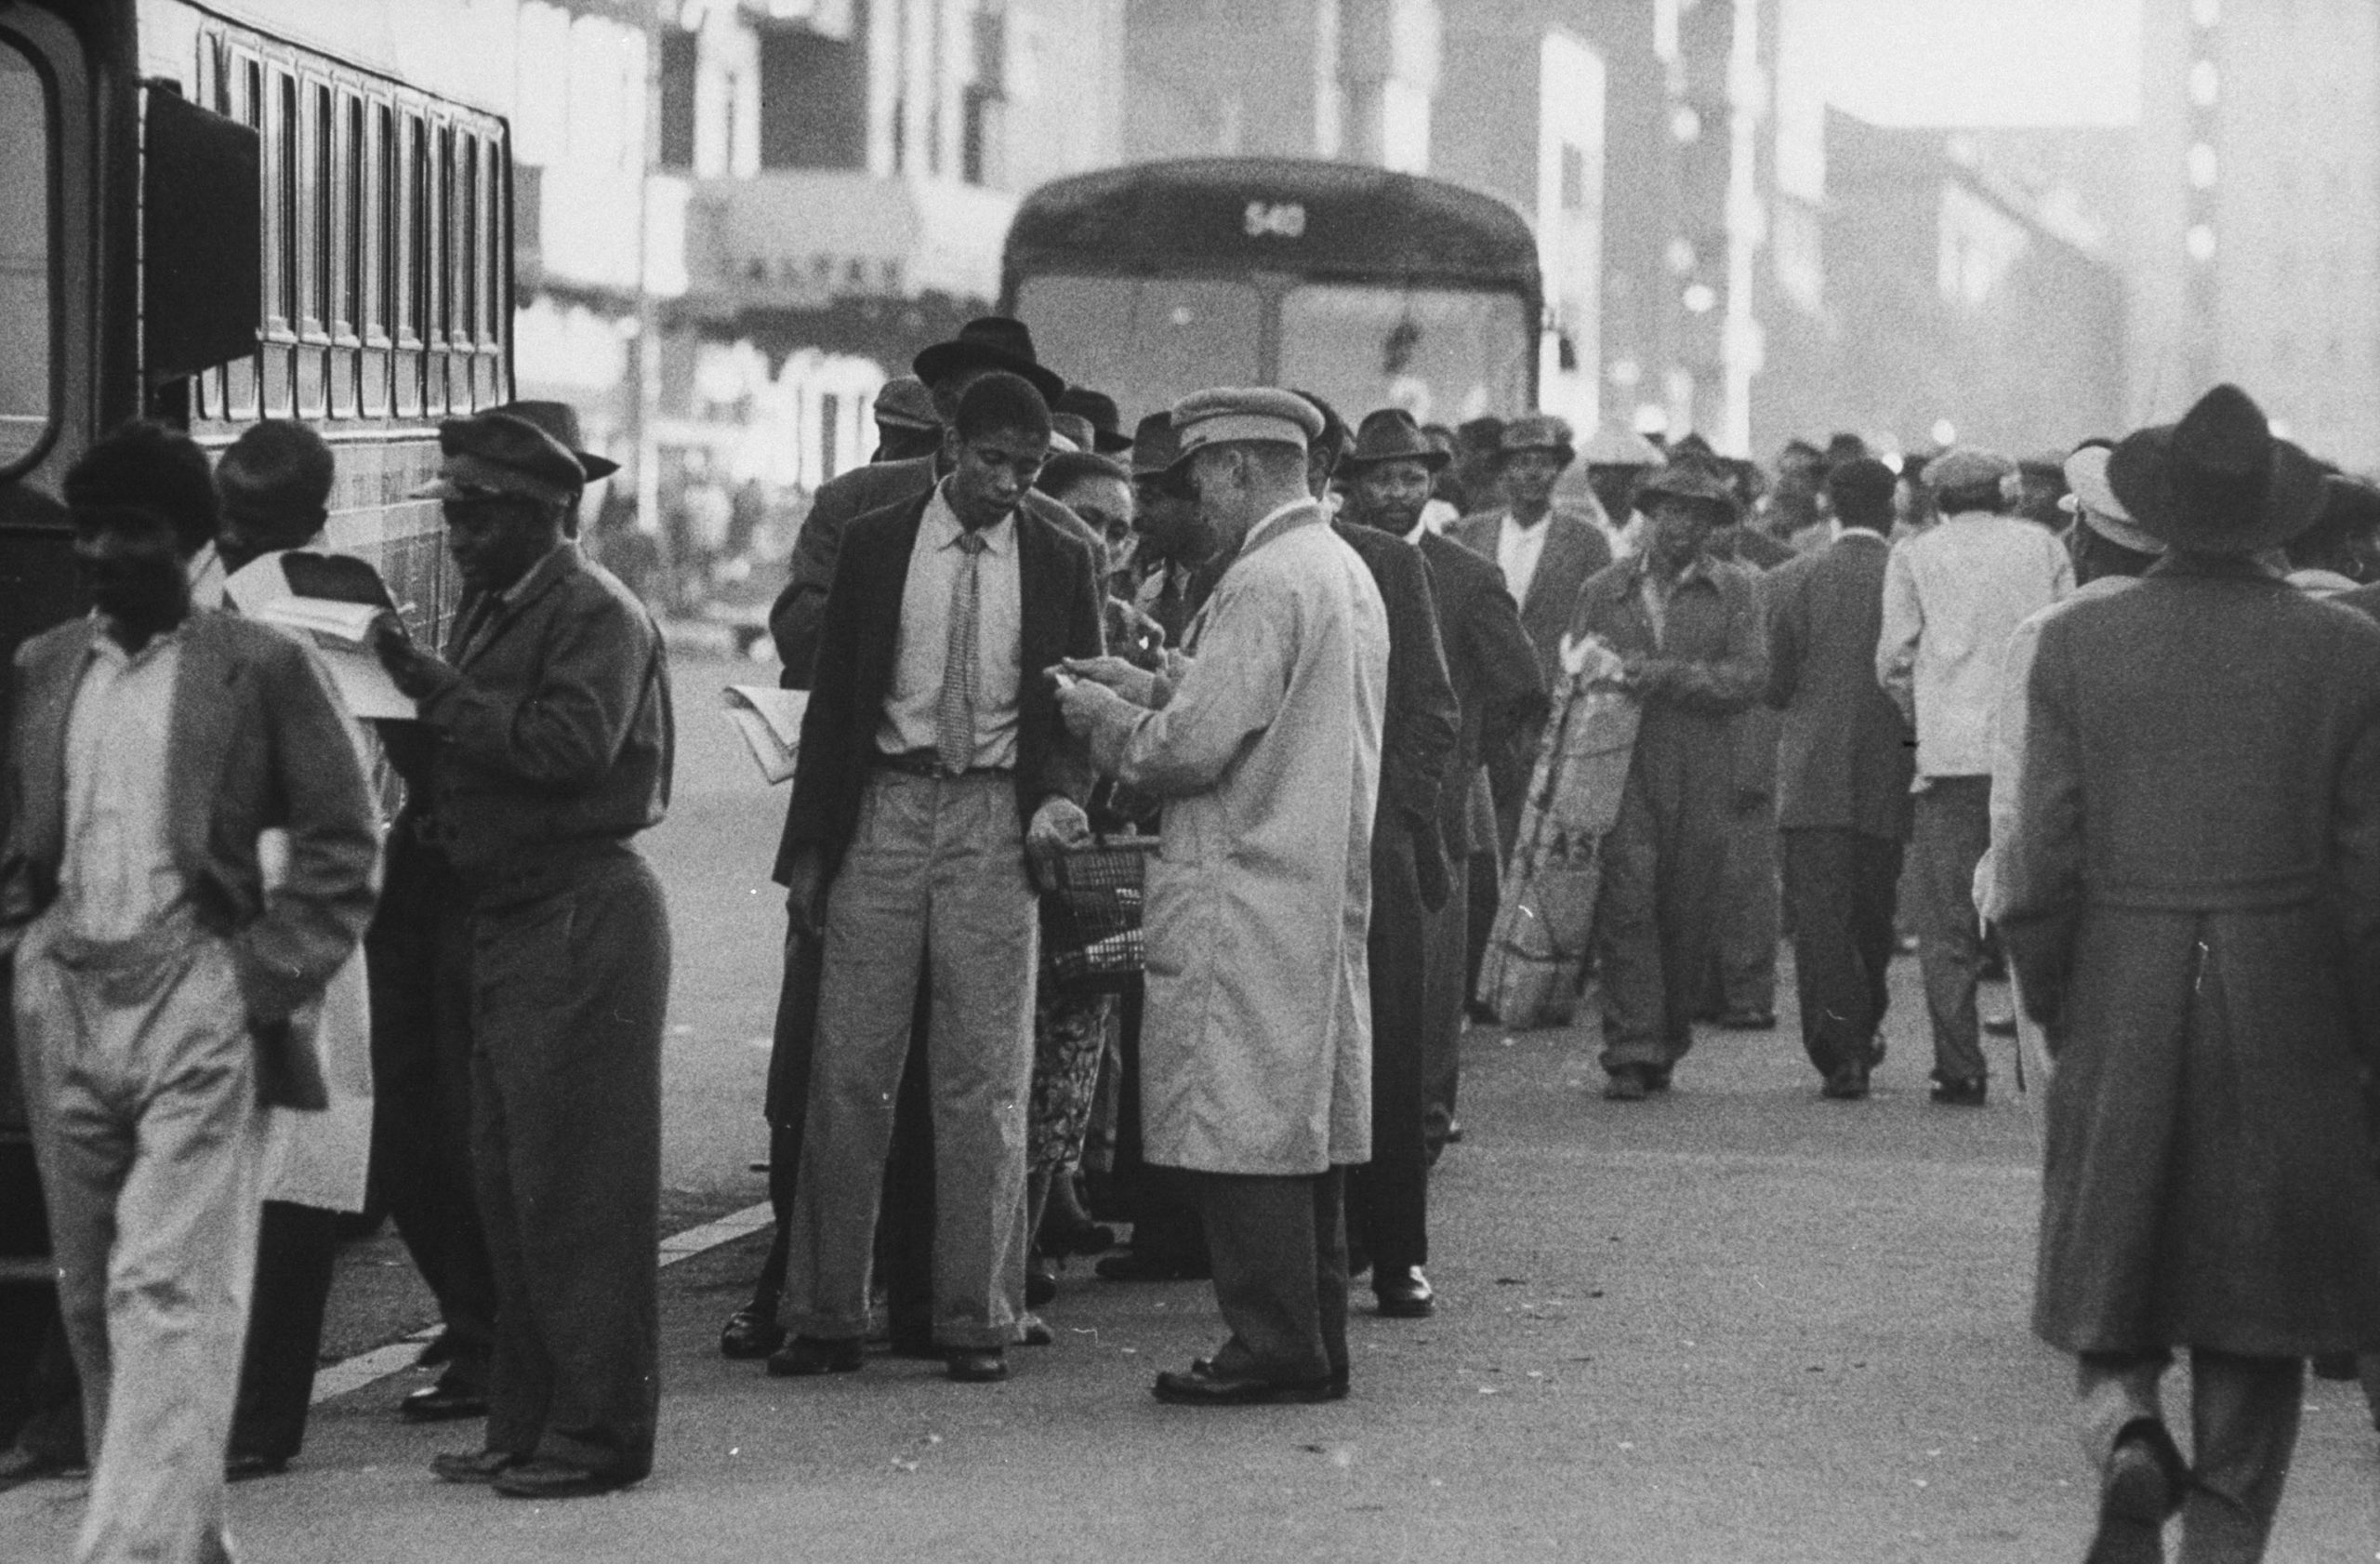 1 April 1960: Workers categorised as coloured under apartheid queue for hours for the bus at the end of the working day to return to their township homes. (Photograph by Grey Villet/ The LIFE Picture Collection via Getty Images)